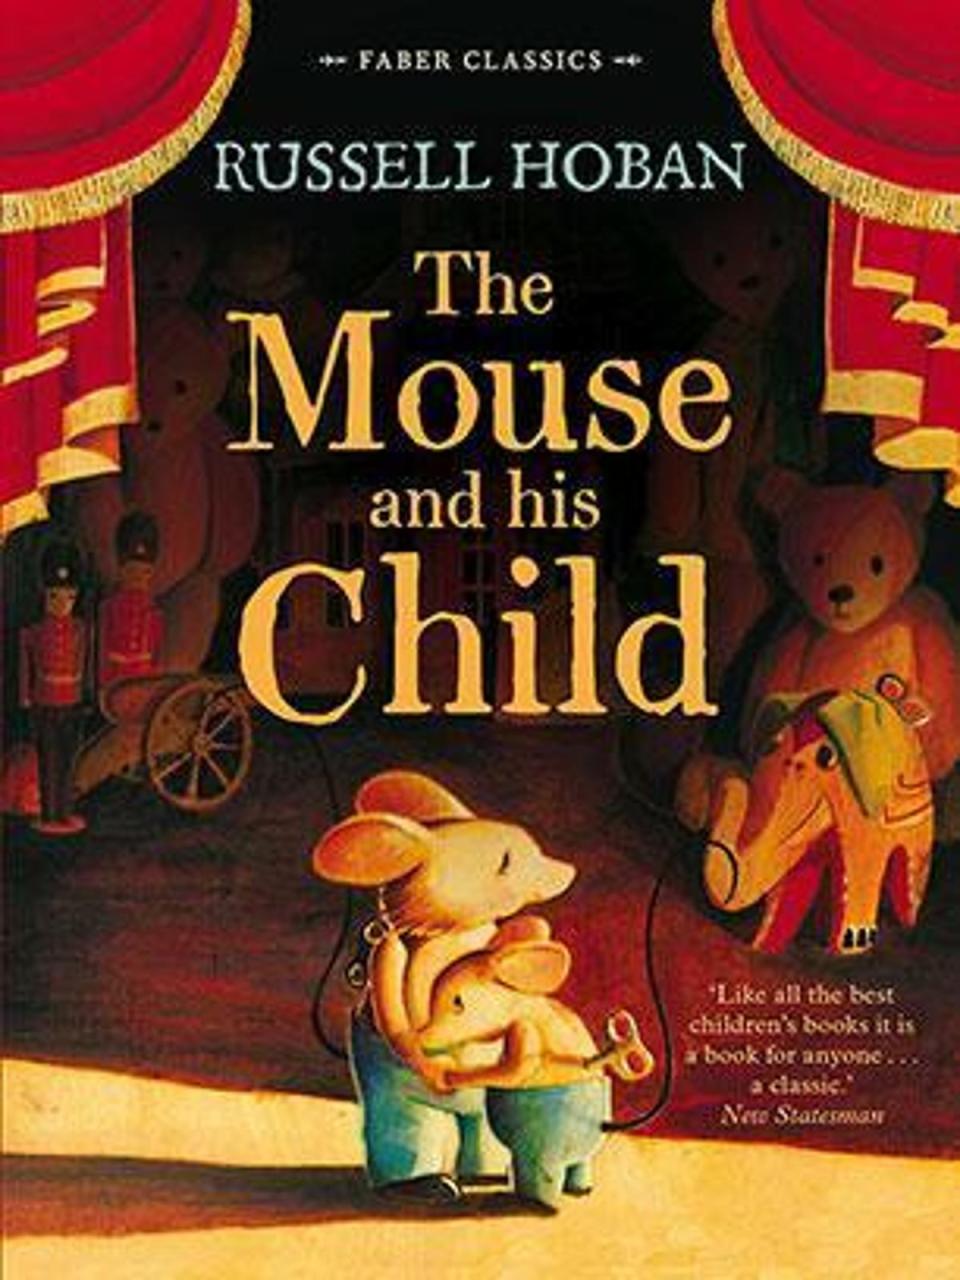 25. The Mouse and His Child by Russell Hoban (1967): 